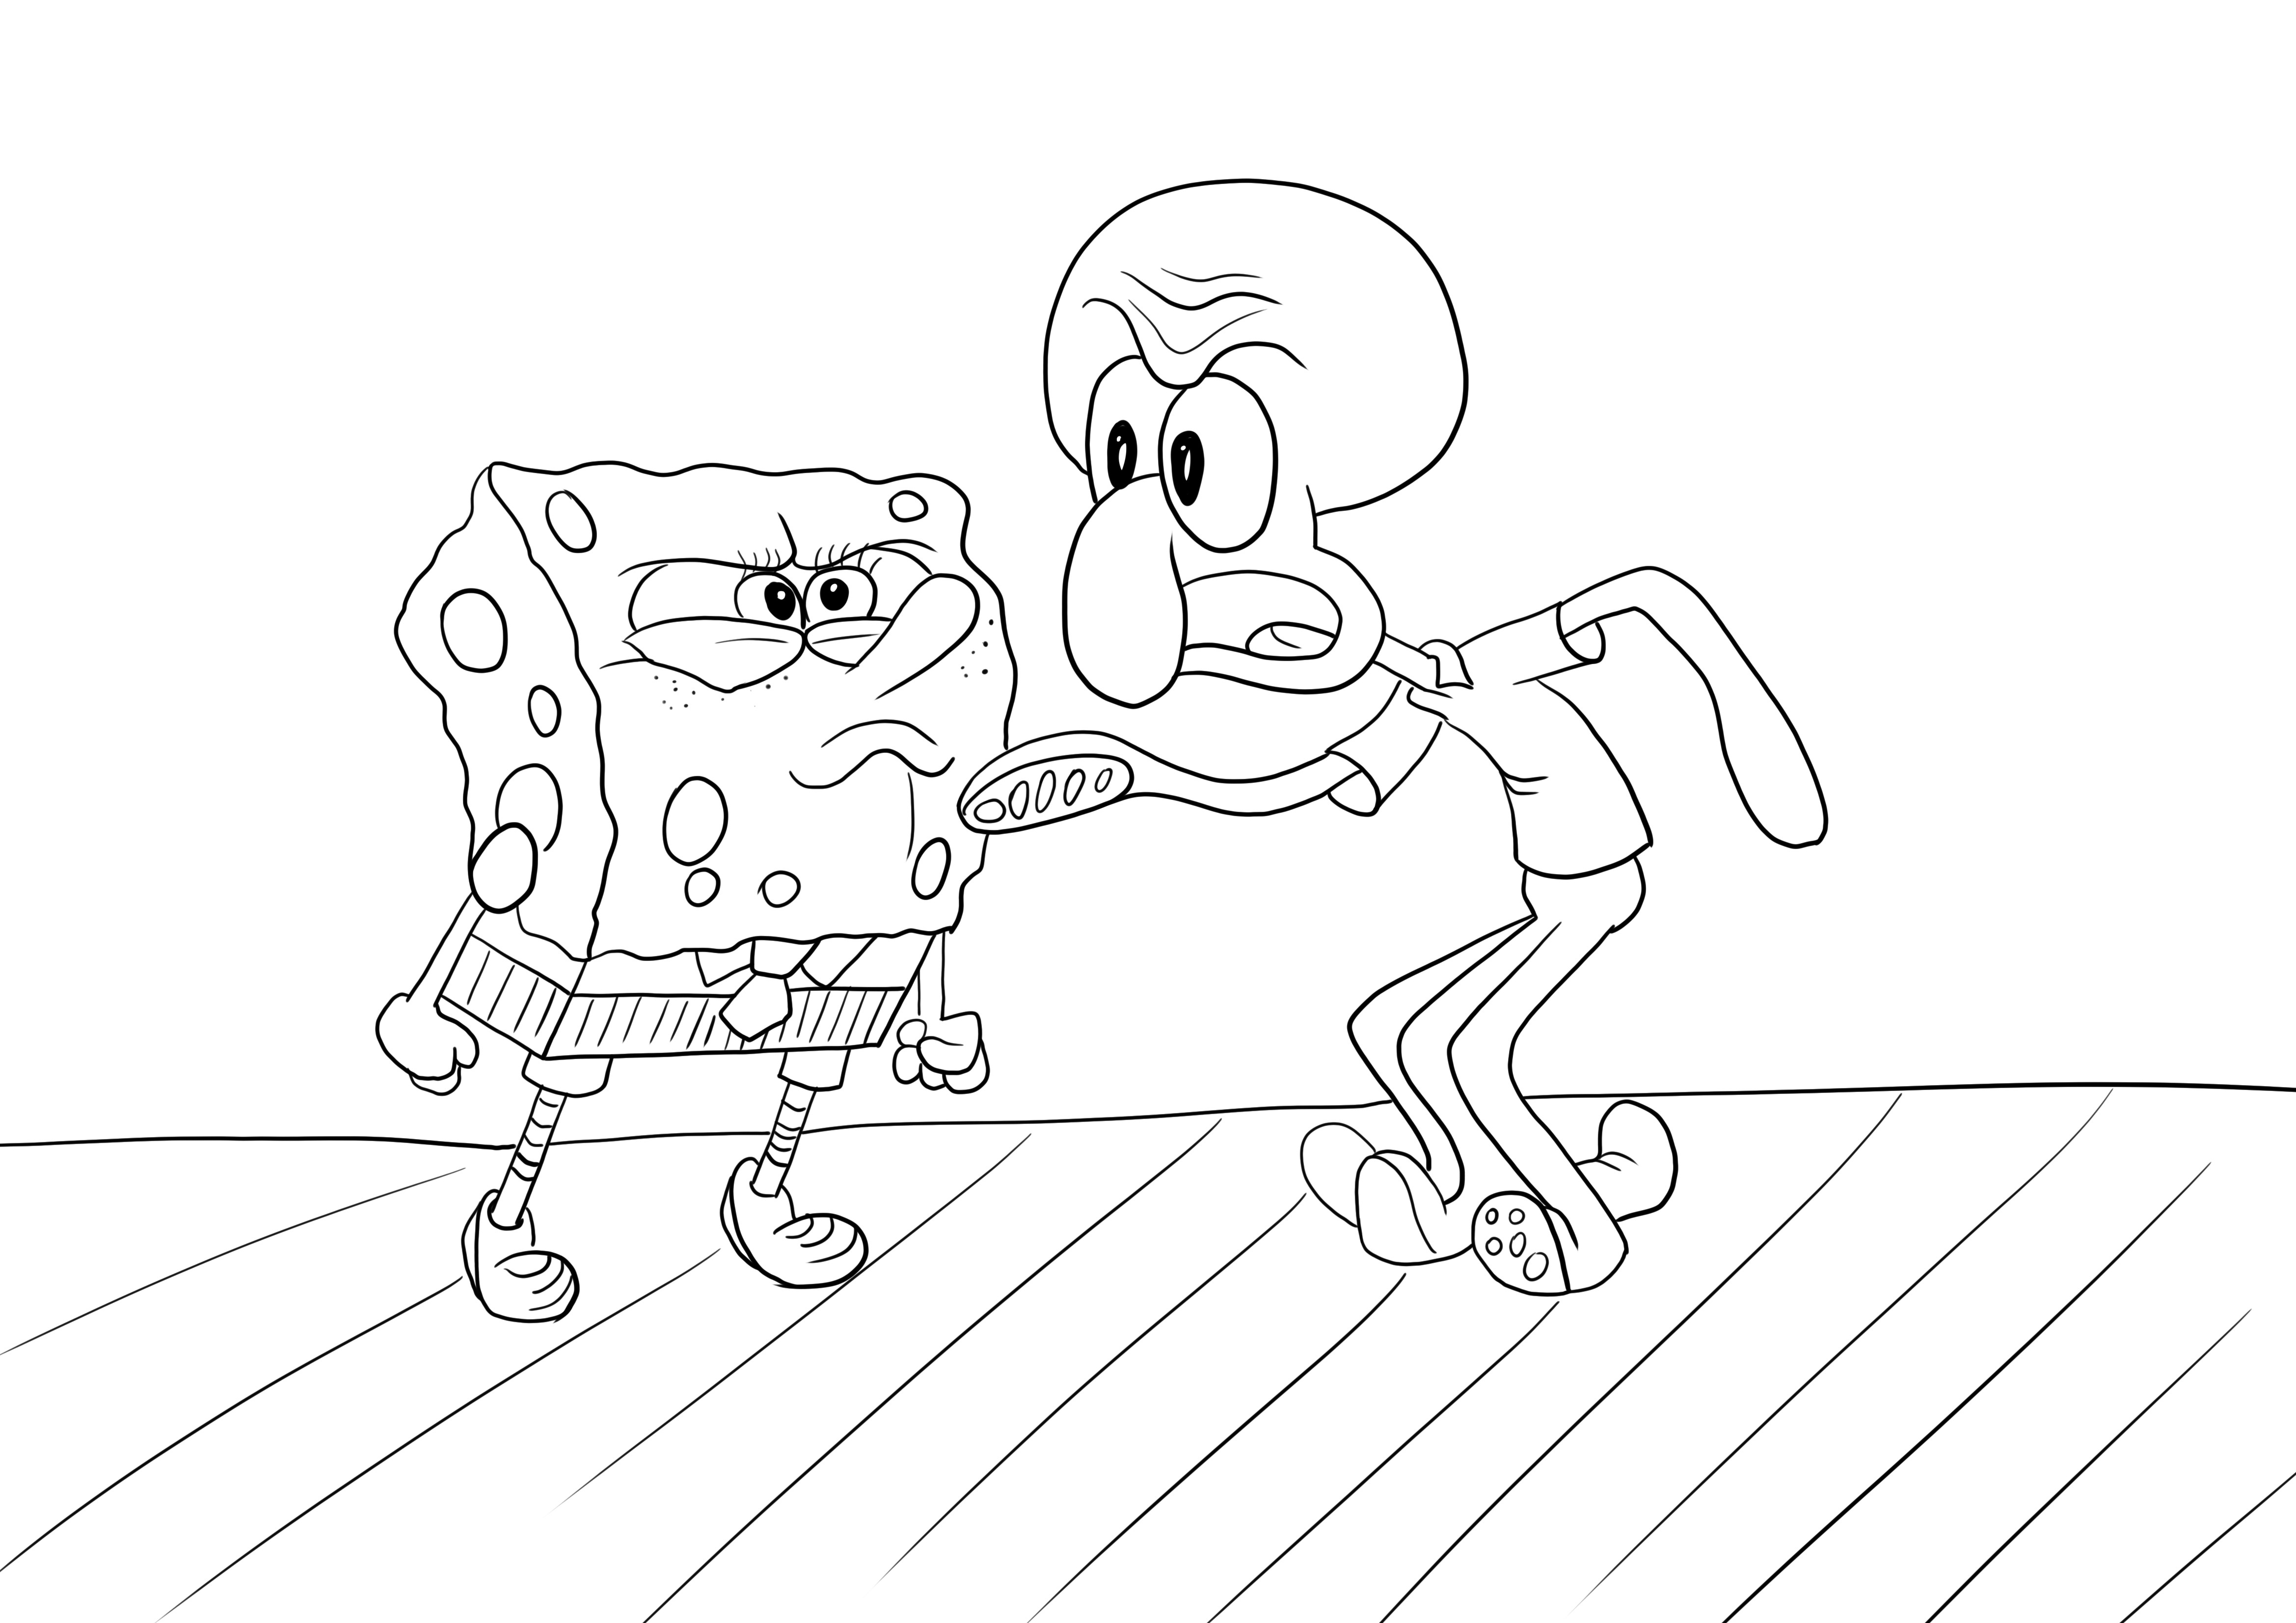 SpongeBob is quarreling to download and free-to-print image